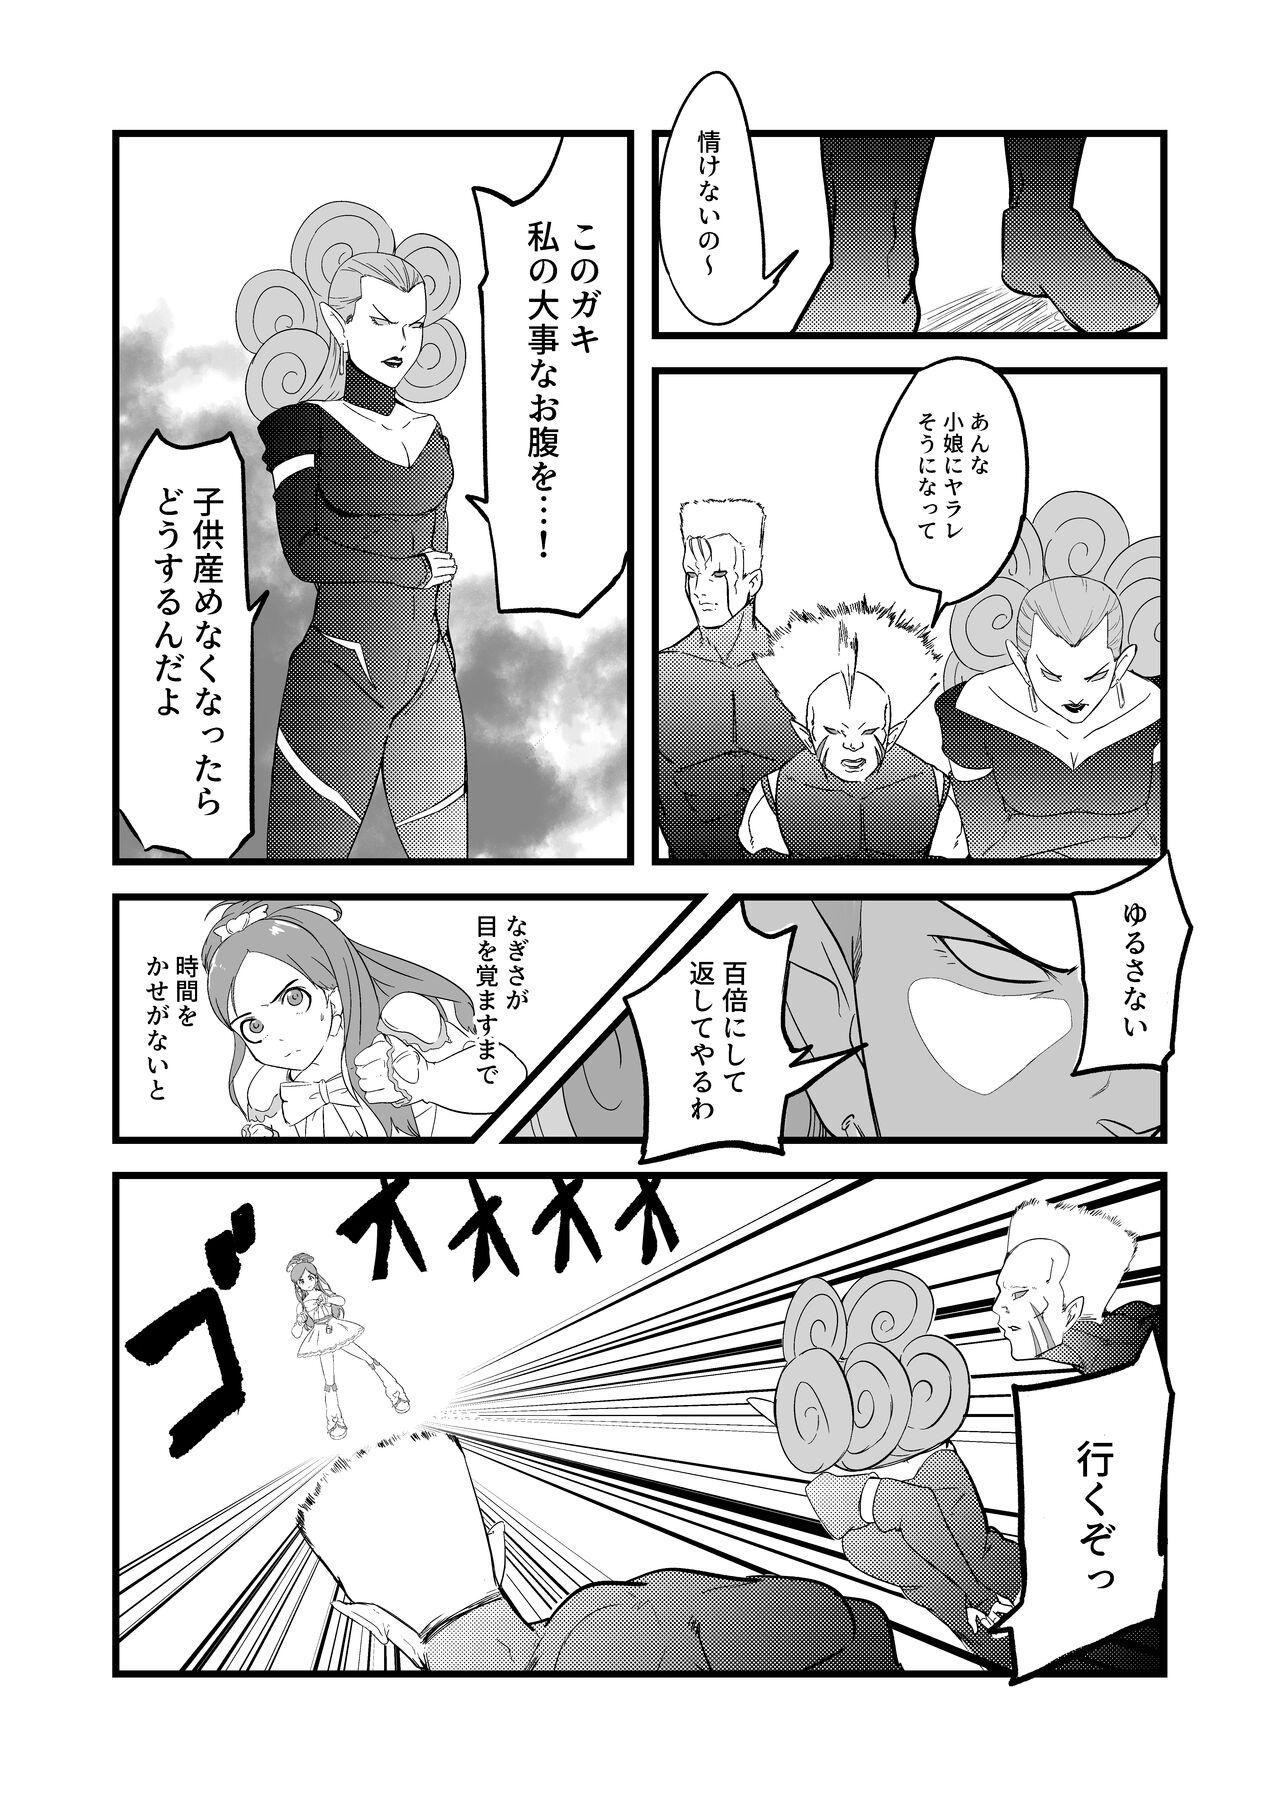 Dance Belly Crisis 7 - Pretty cure Stepbrother - Page 8